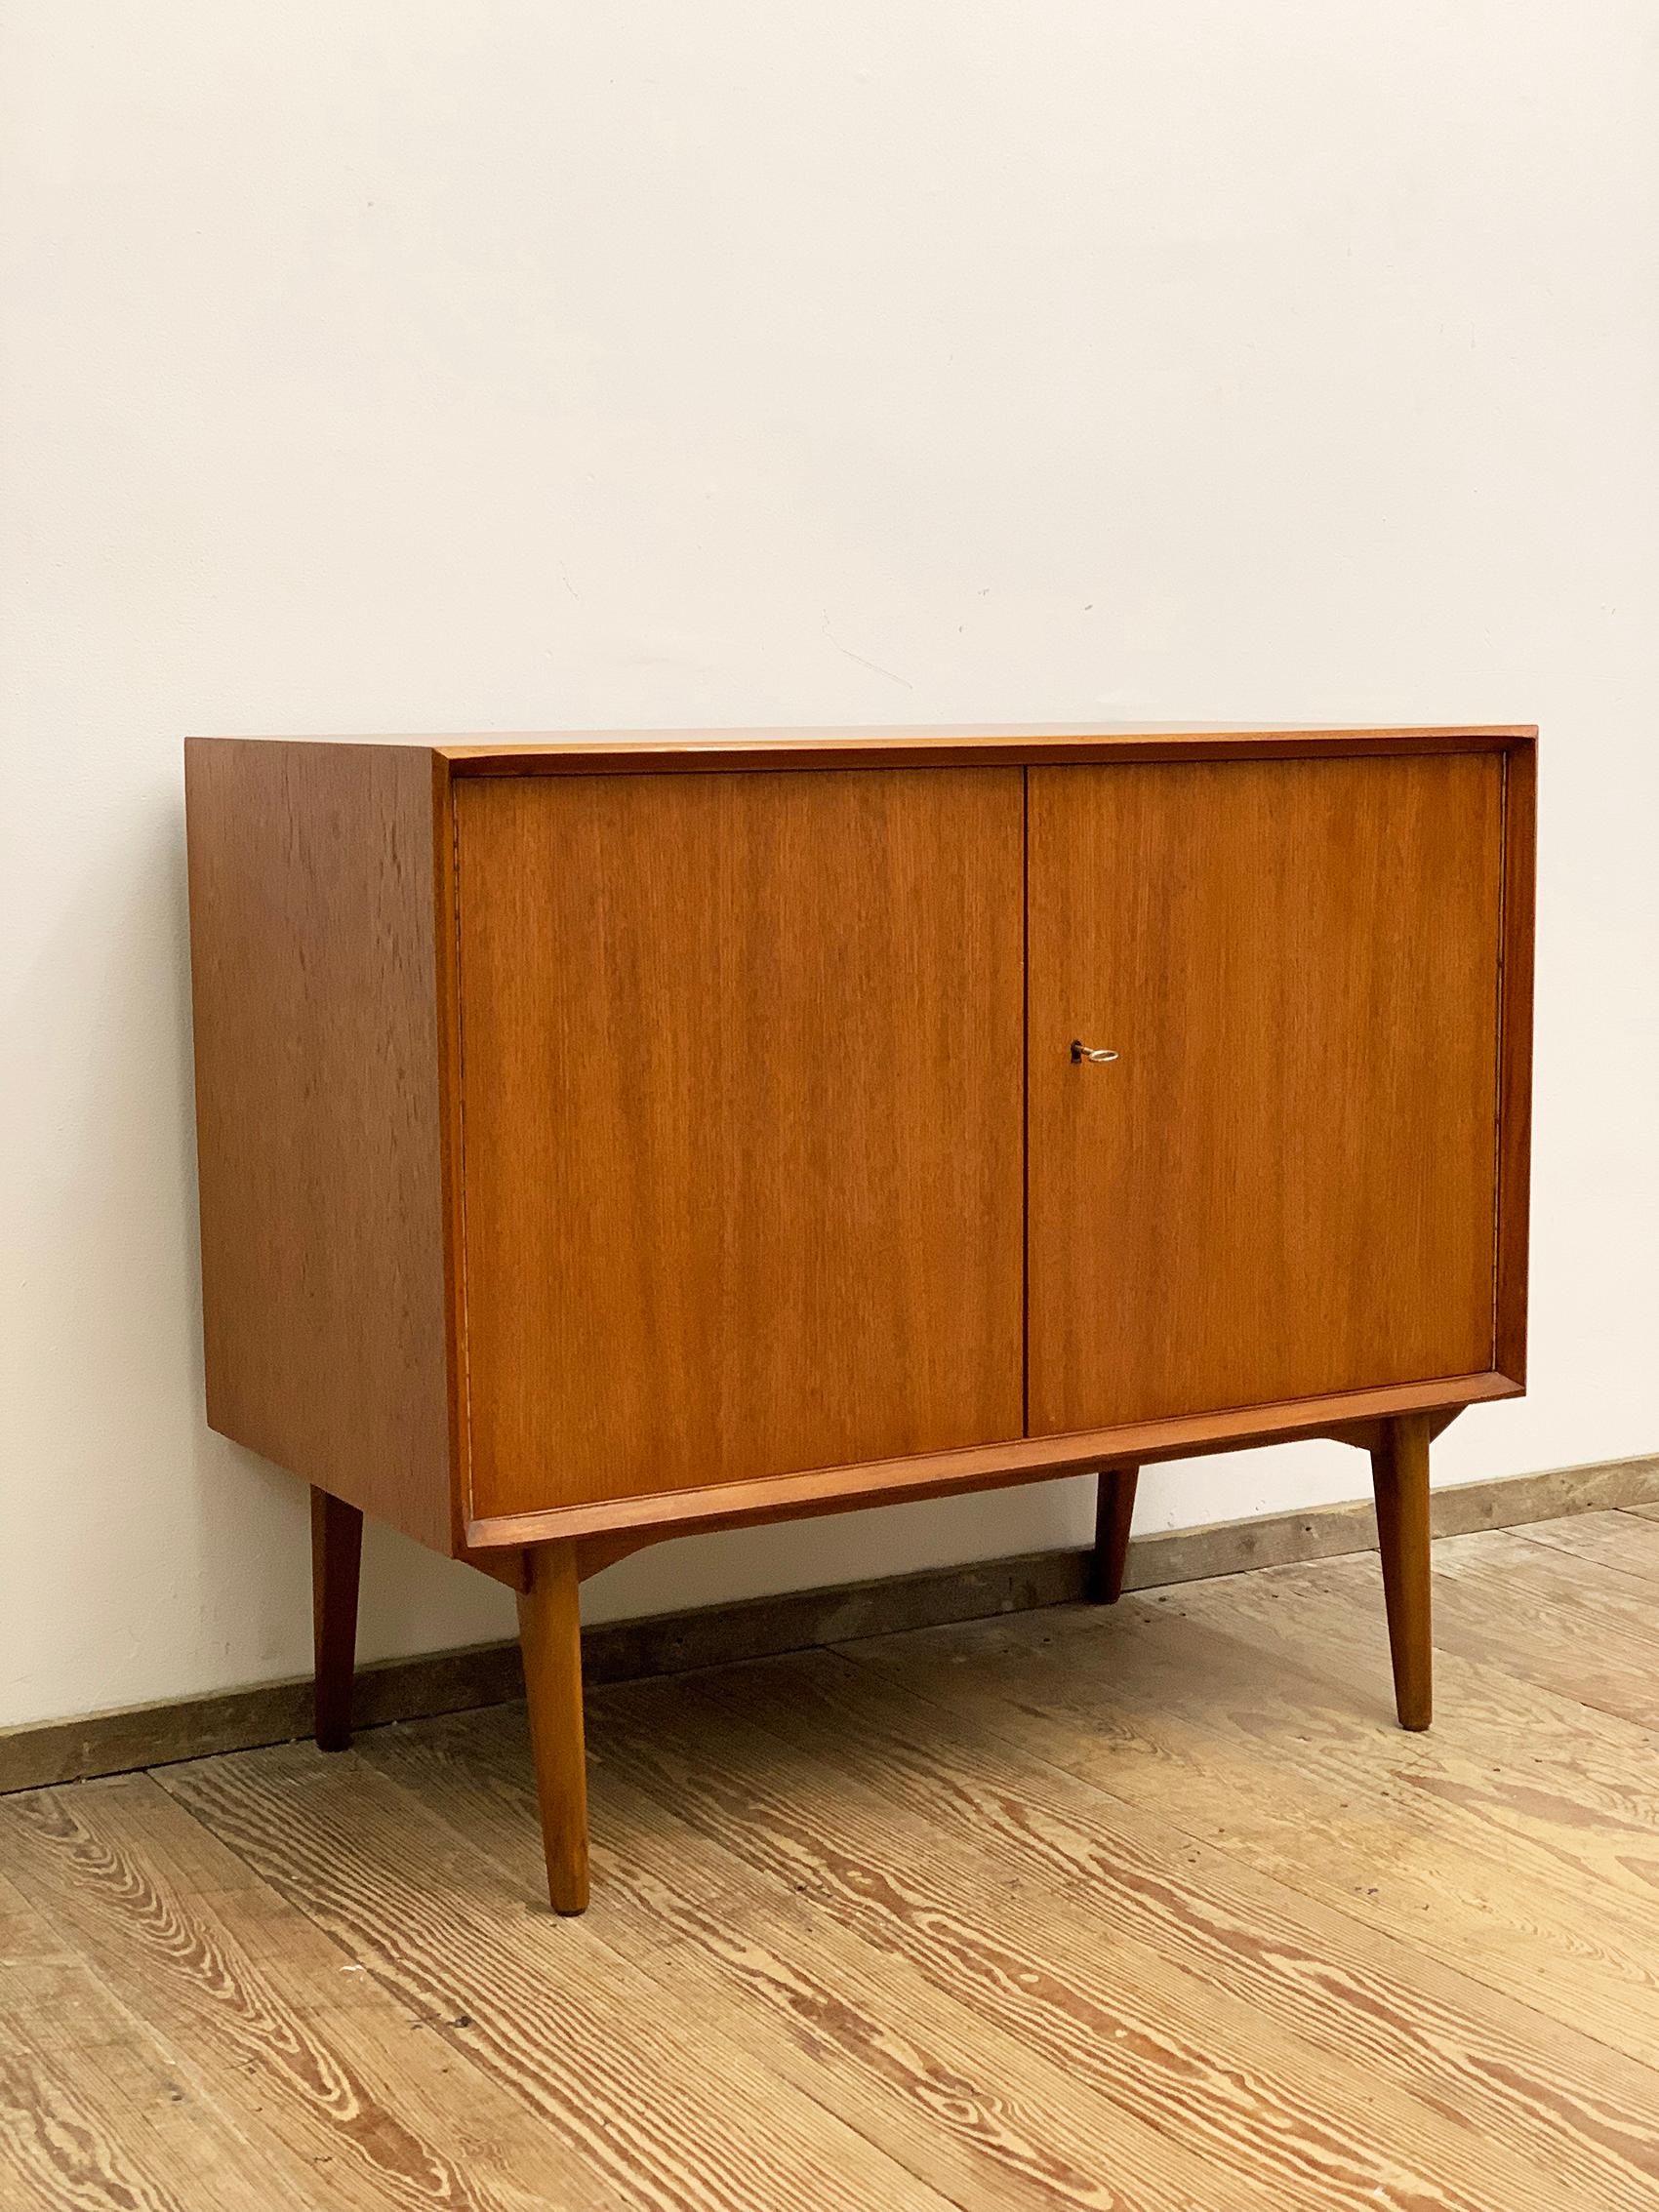 Small Mid-Century Sideboard in Teak by Rex Raab for Wilhelm Renz, Germany, 1960s For Sale 9